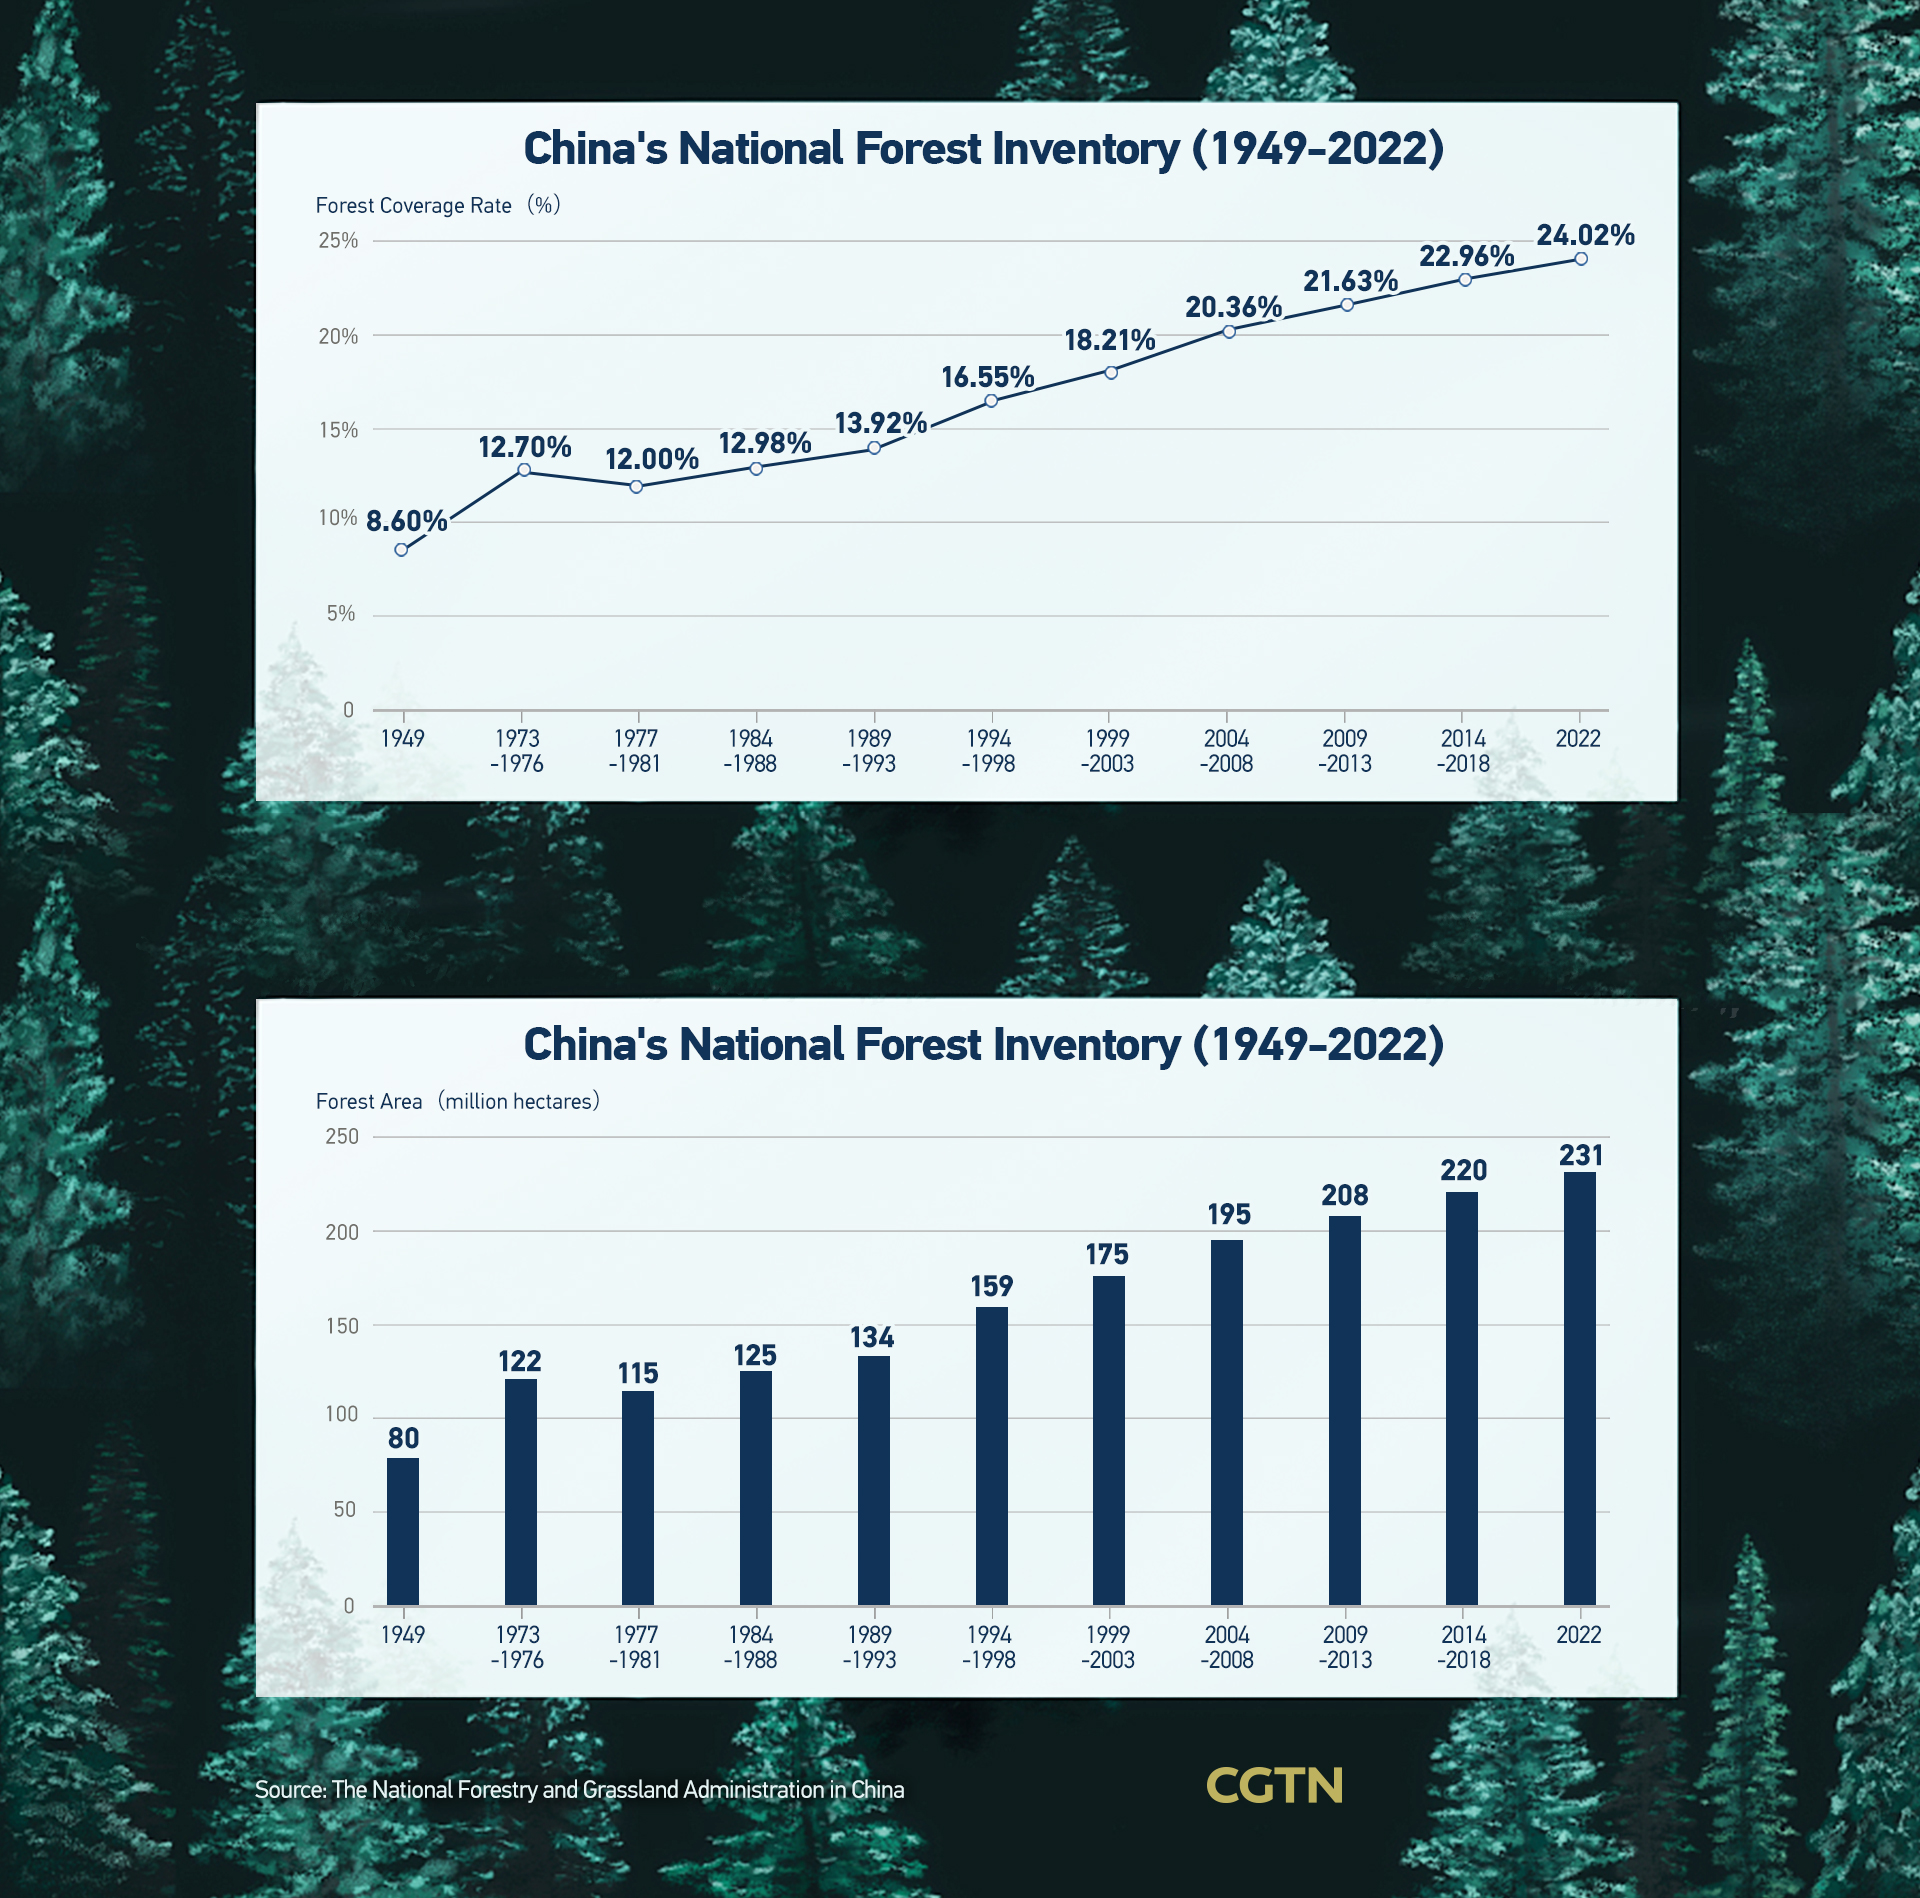 China's National Forestry Inventory (1949-2022). /CGTN